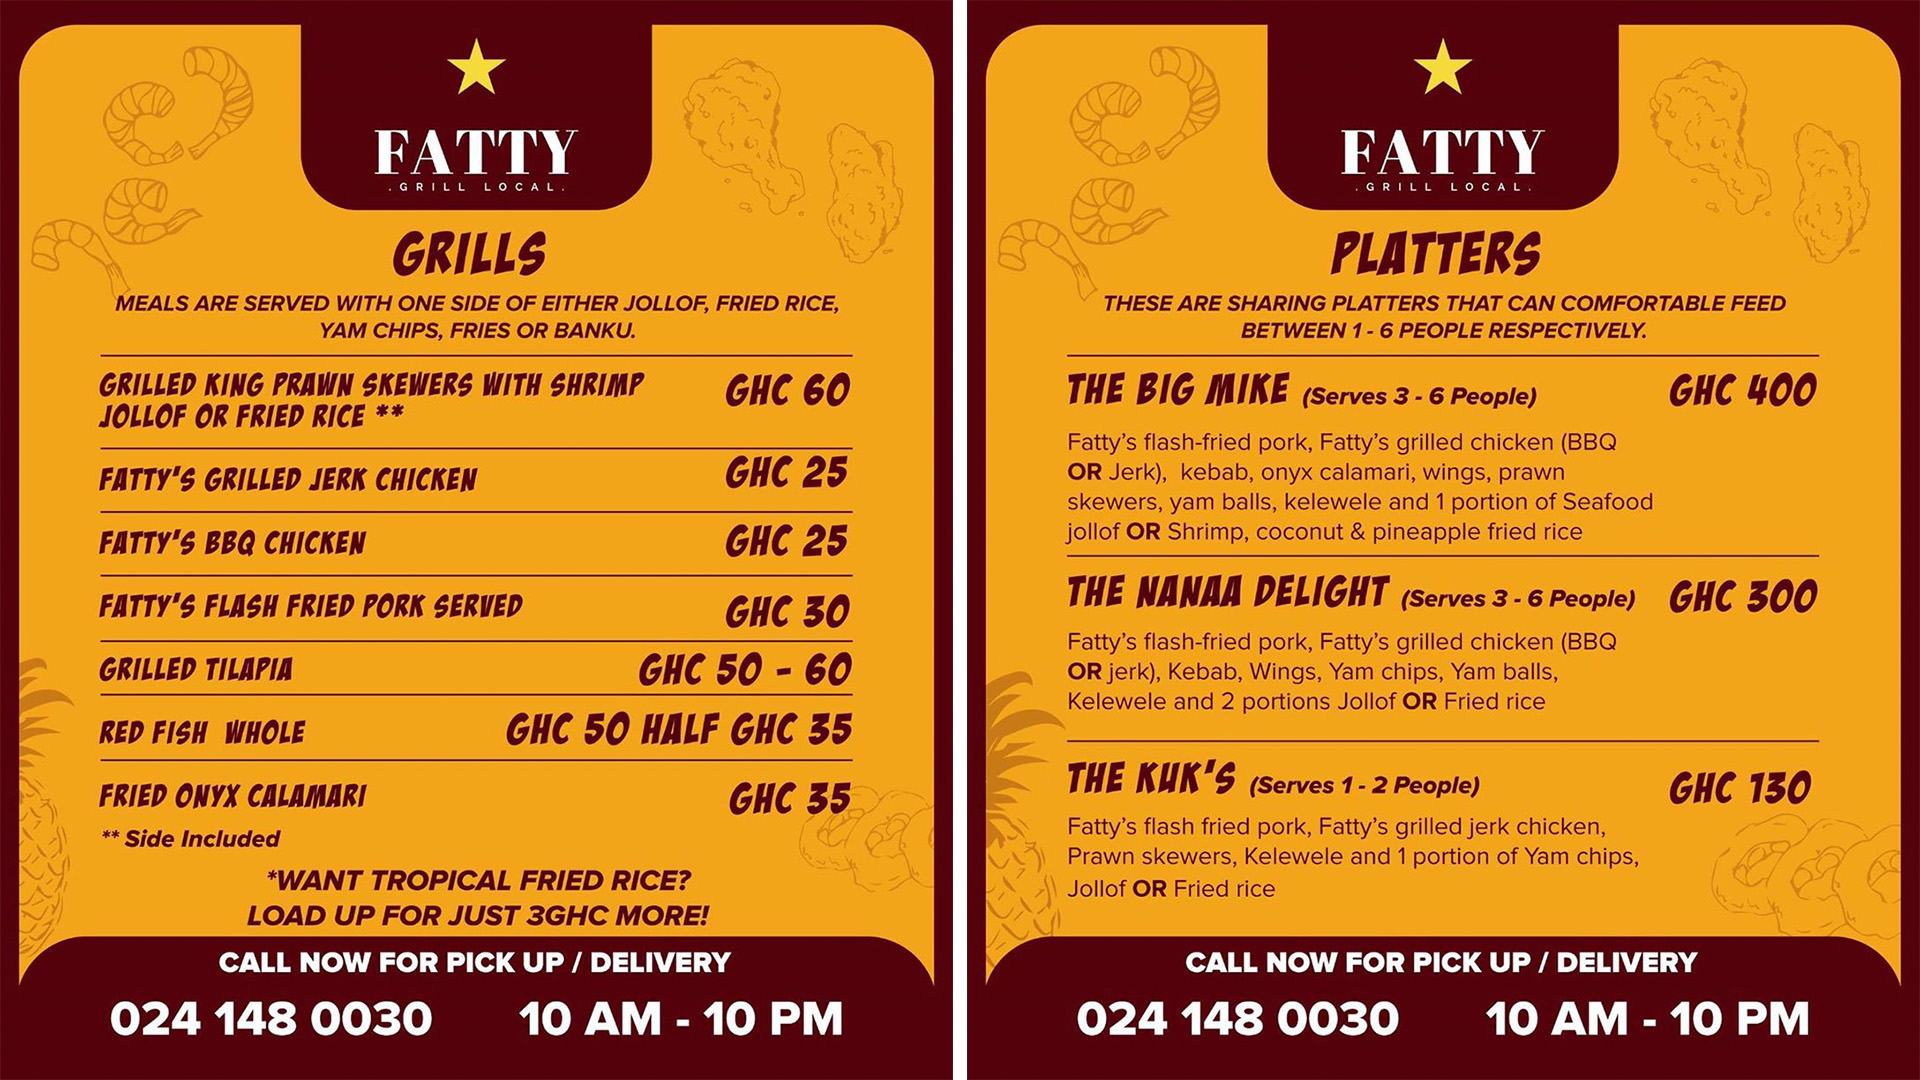 Fatty Grill Local Menu and Prices